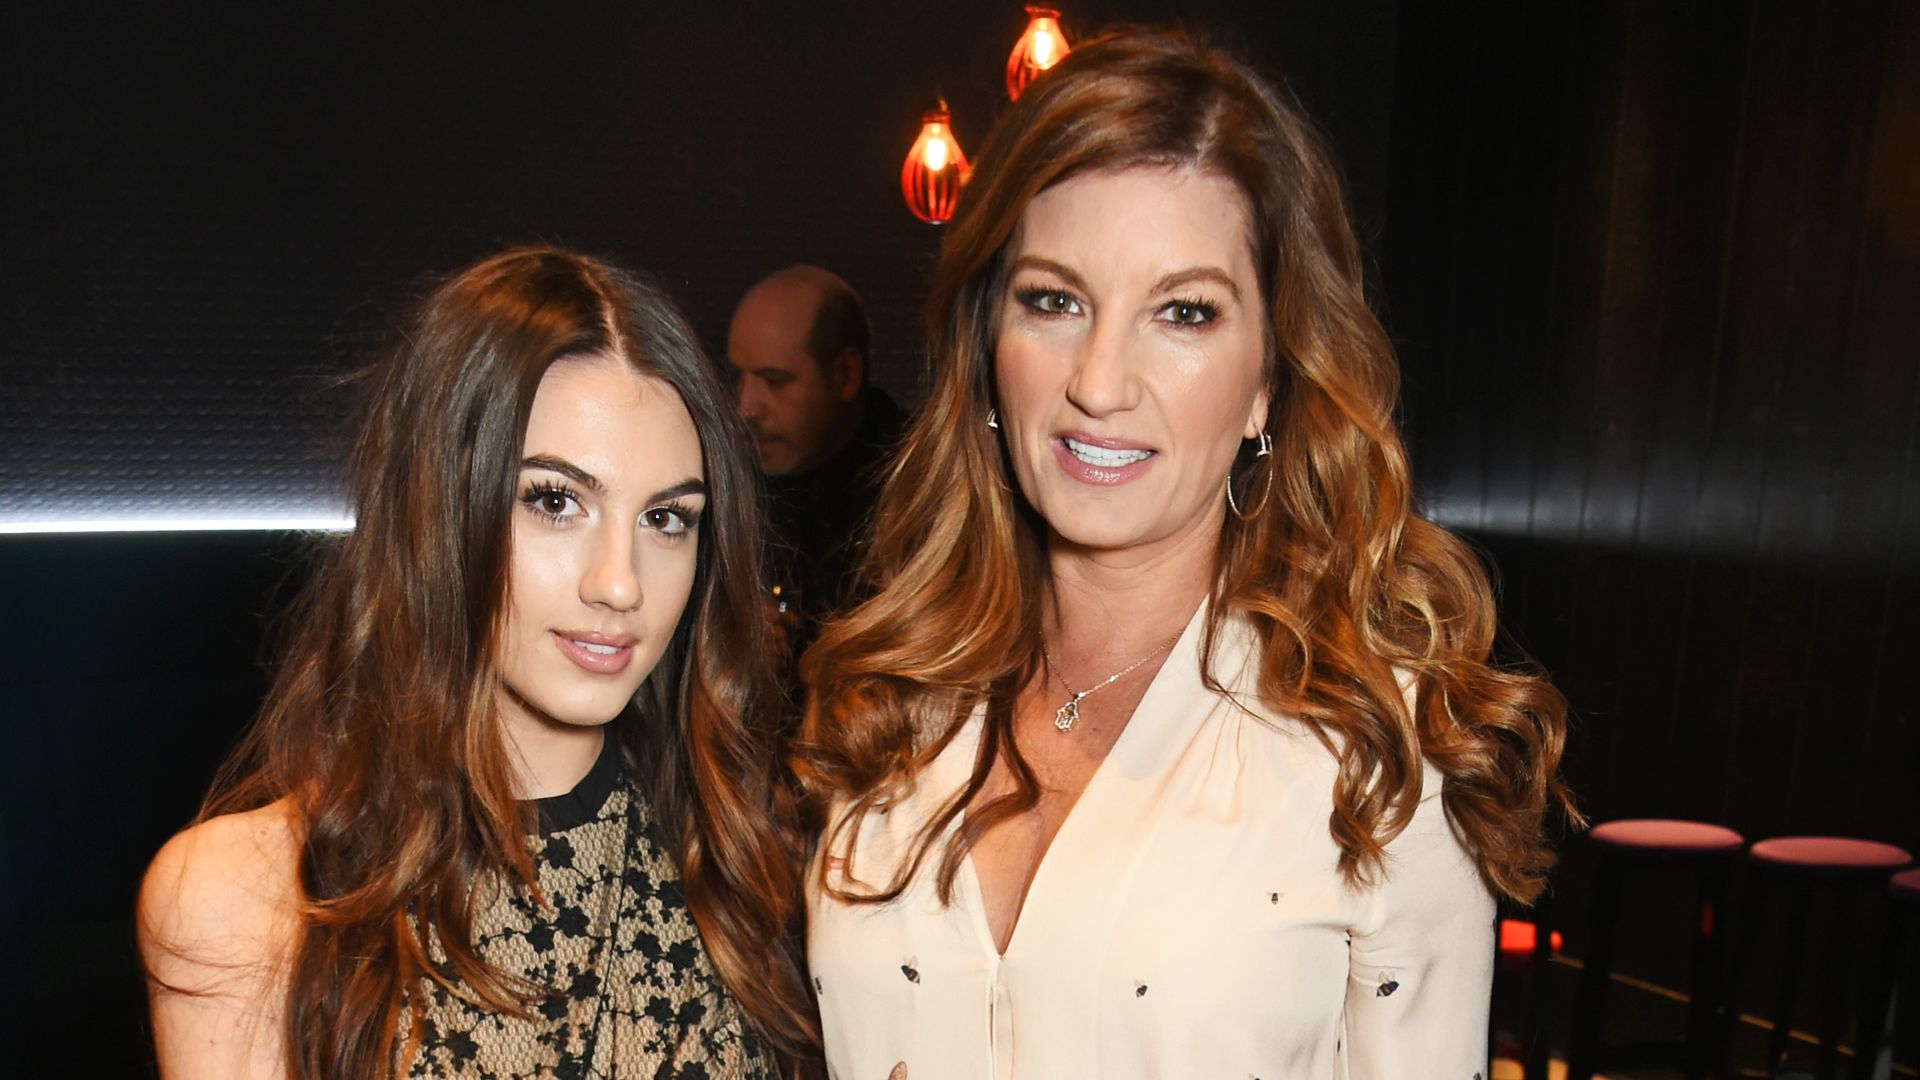 Everything Karren Brady has said about becoming a grandmother to model daughter's newborn son